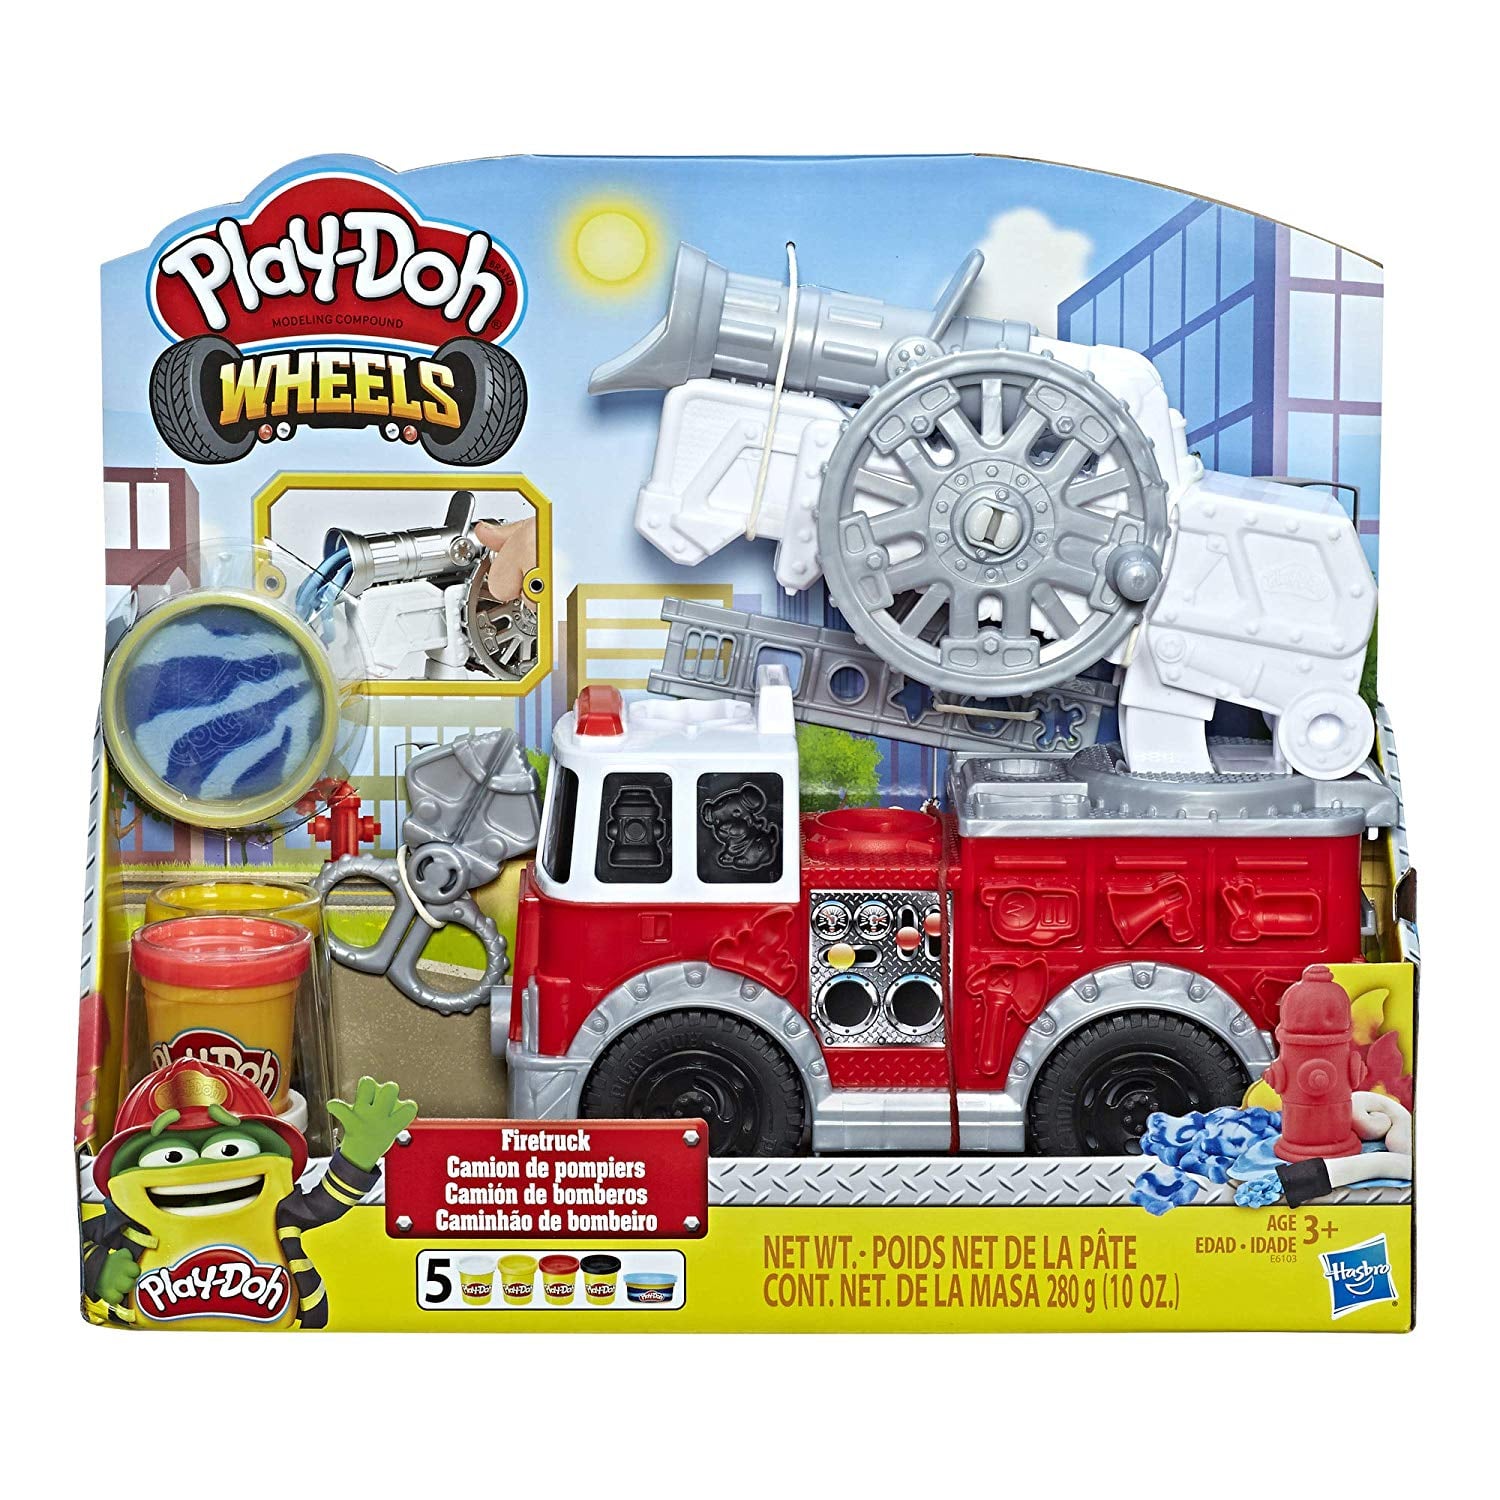 fire truck toy for 5 year old